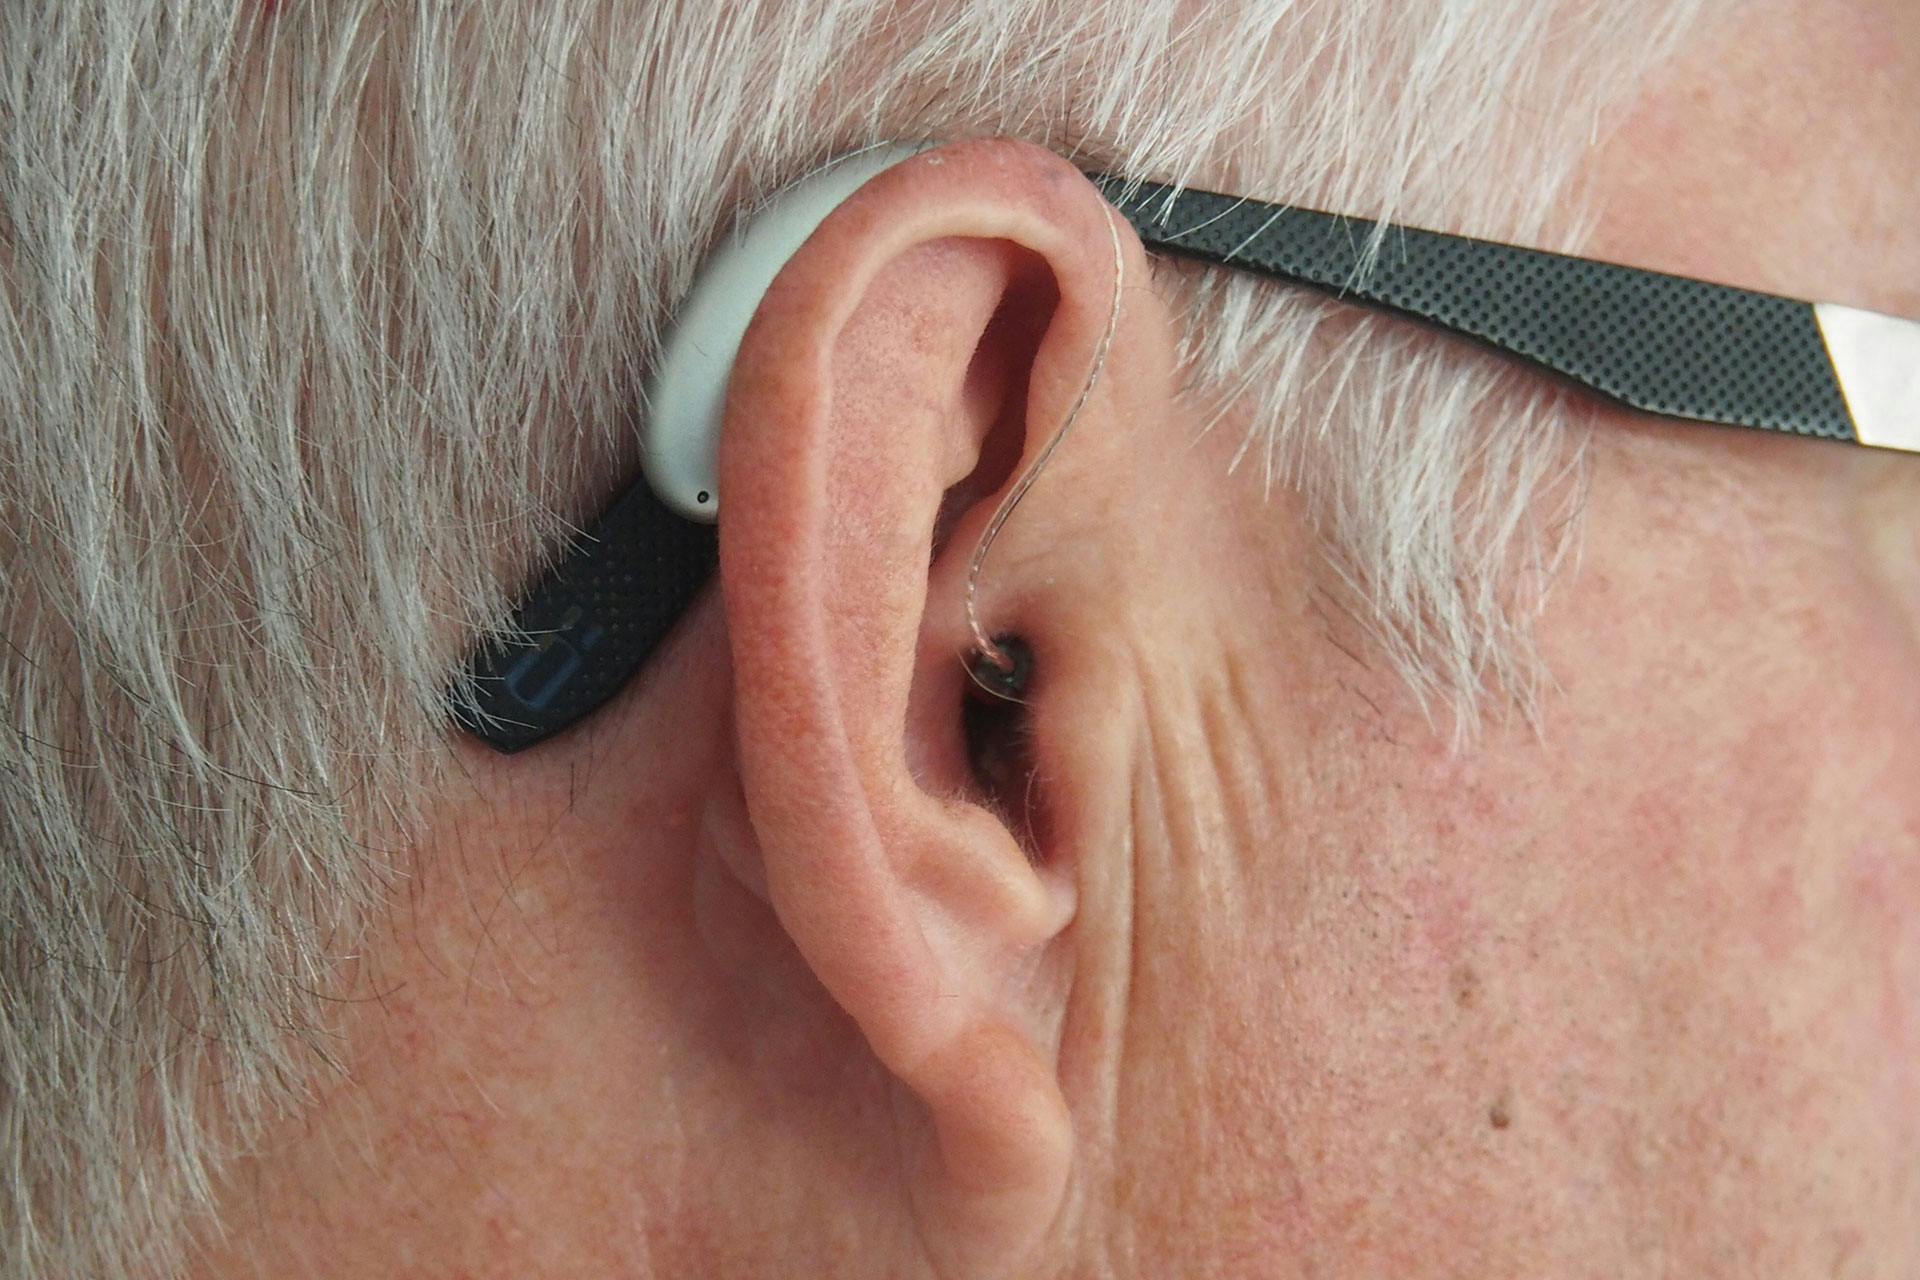 Can You Still Be a Real Audiophile If You Have Lost a Little of Your Hearing?